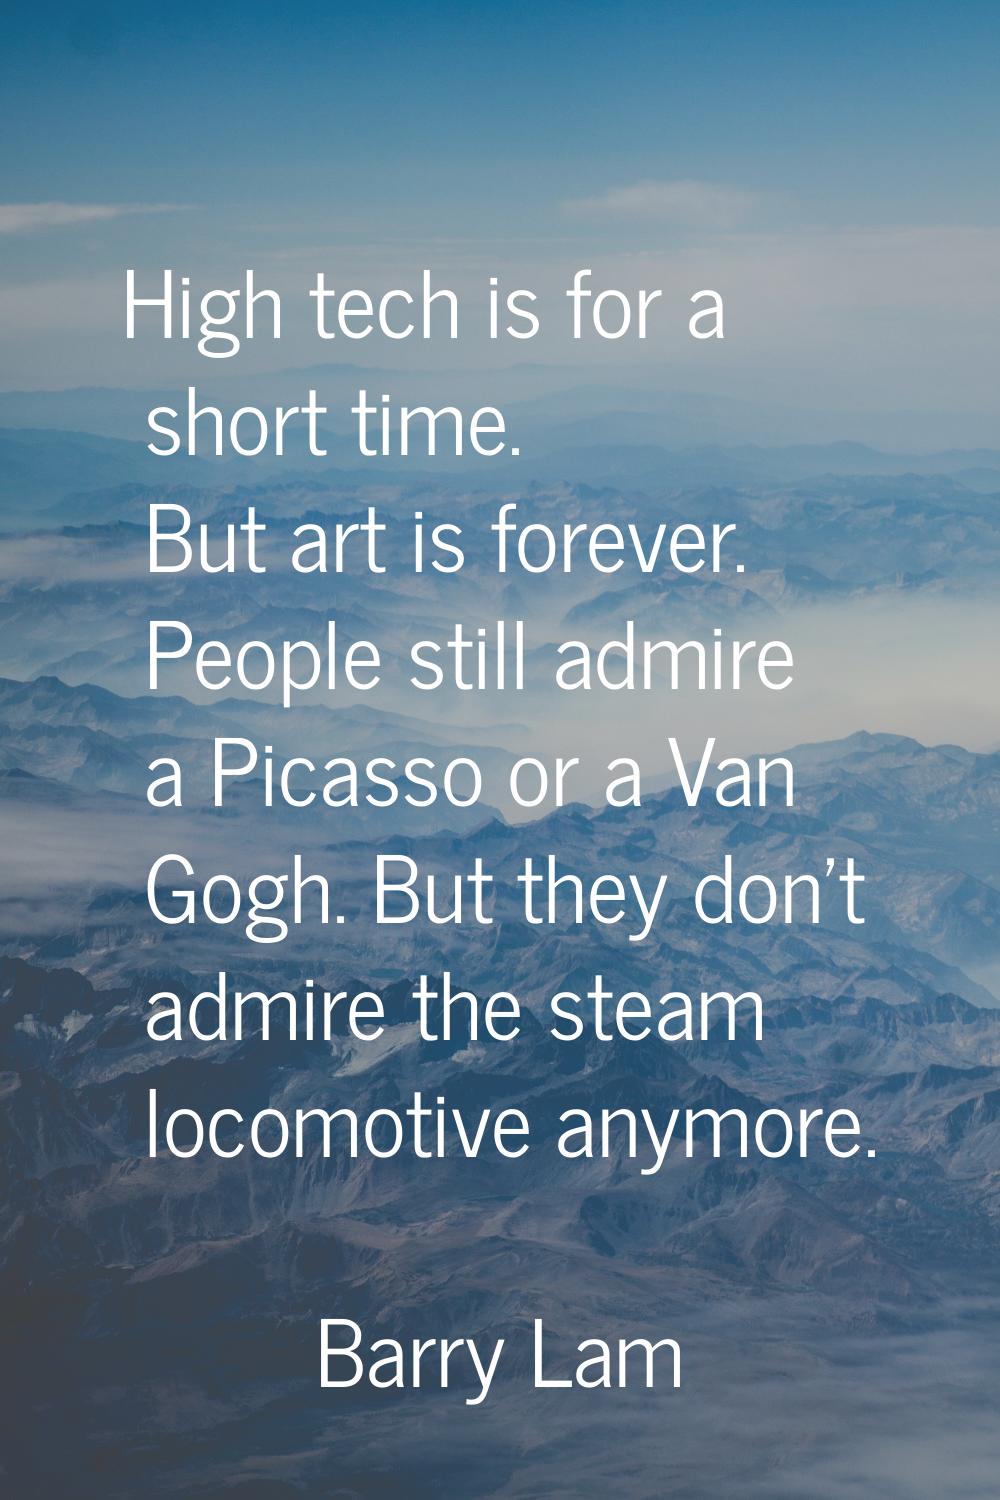 High tech is for a short time. But art is forever. People still admire a Picasso or a Van Gogh. But